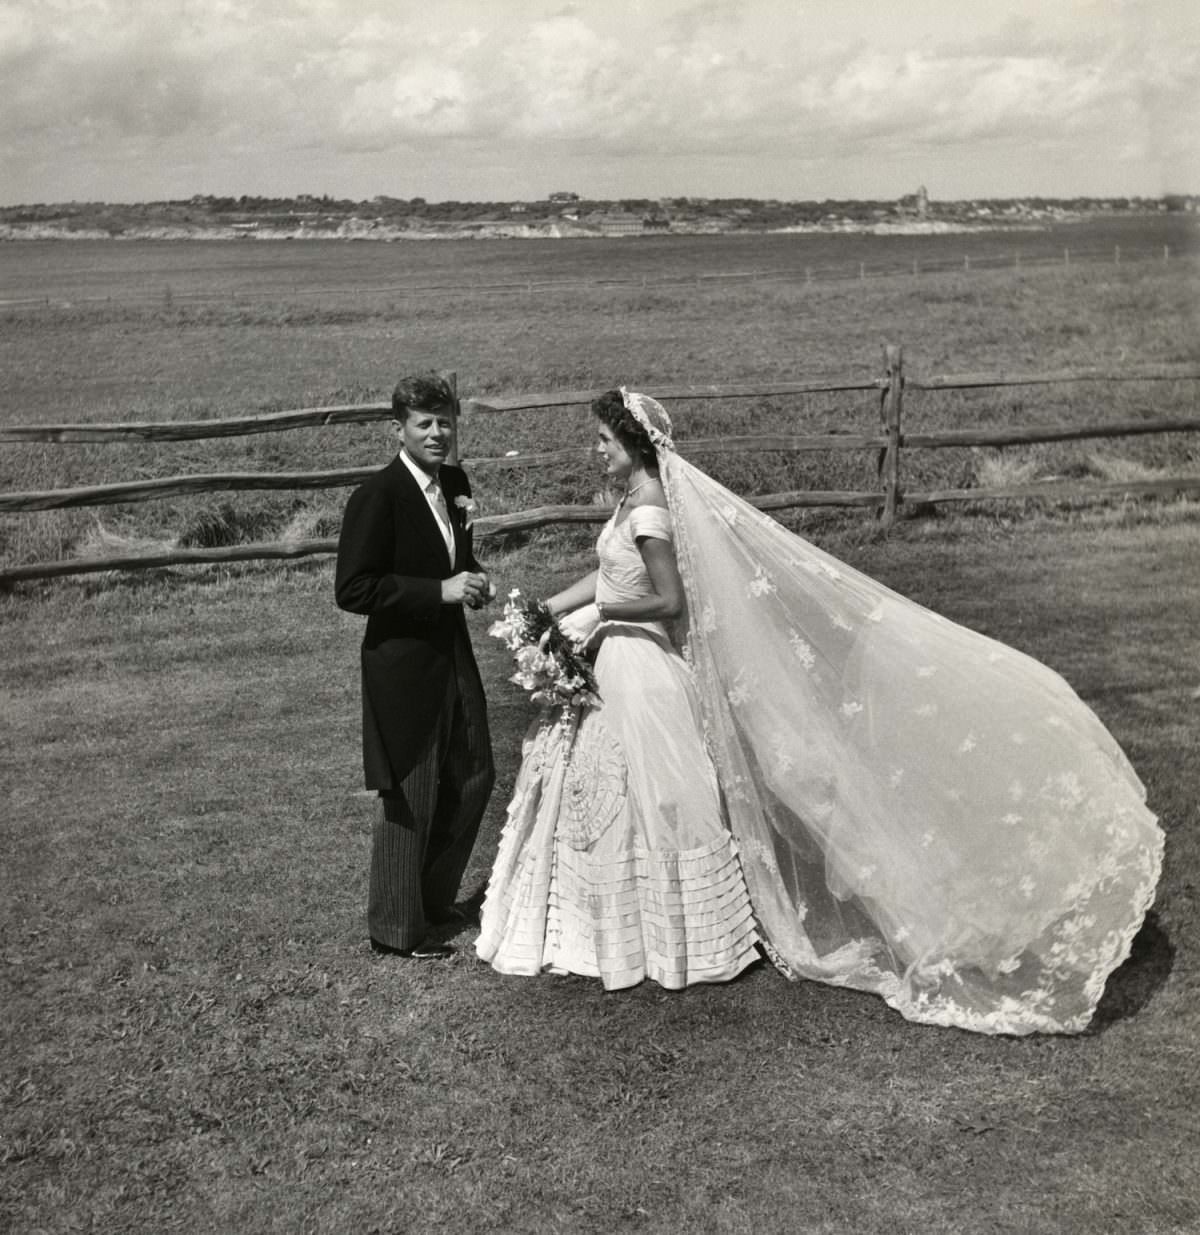 John F. Kennedy and Jacqueline Bouvier on their wedding day, 1953.